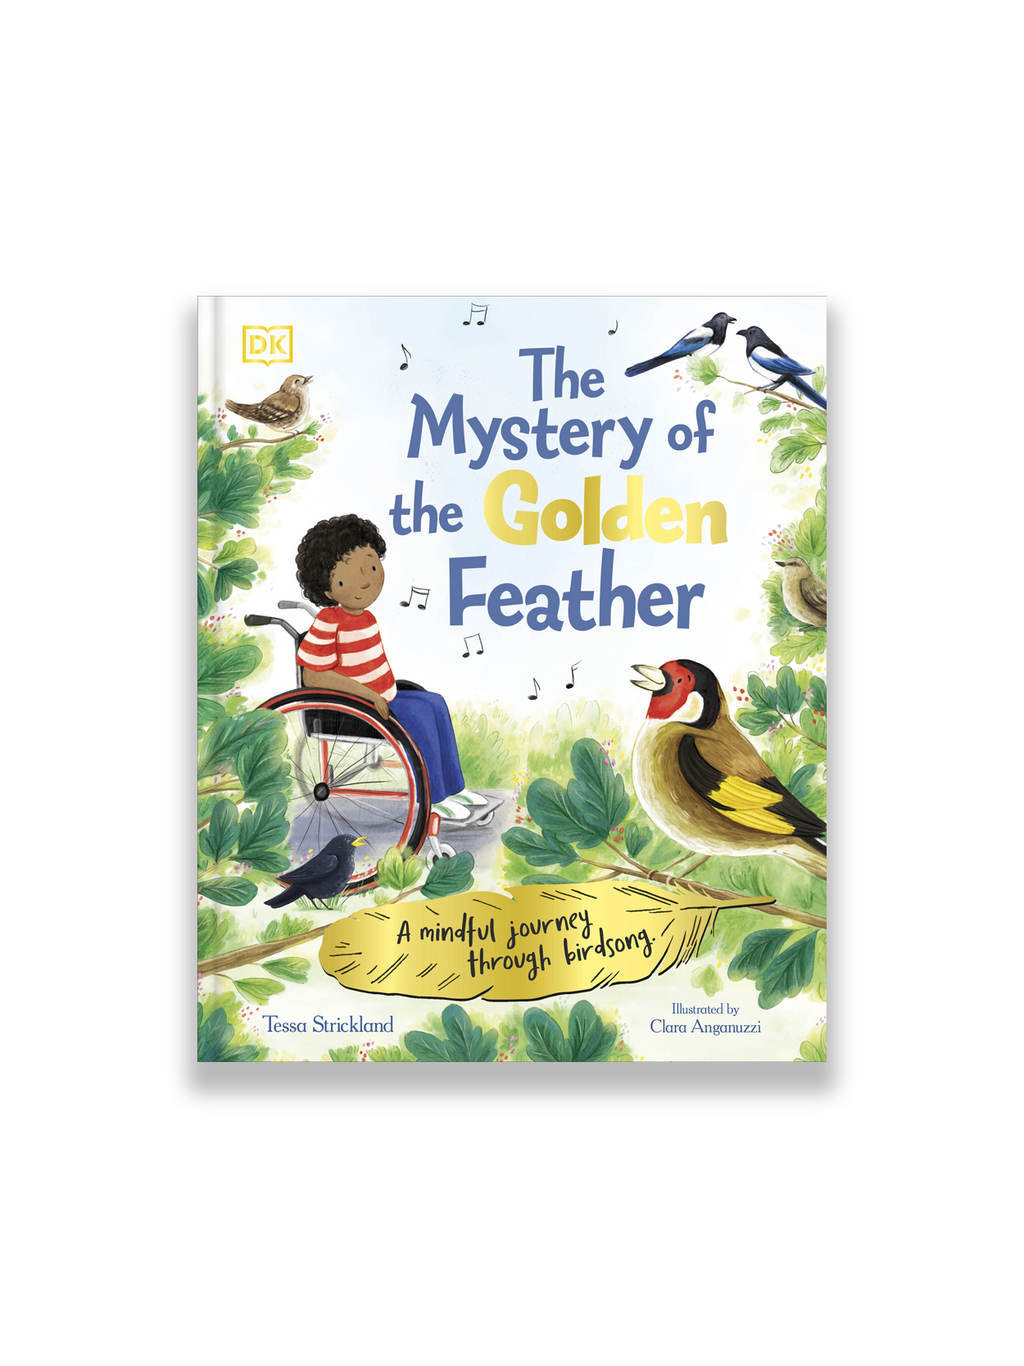 The Mystery of the Golden Feather